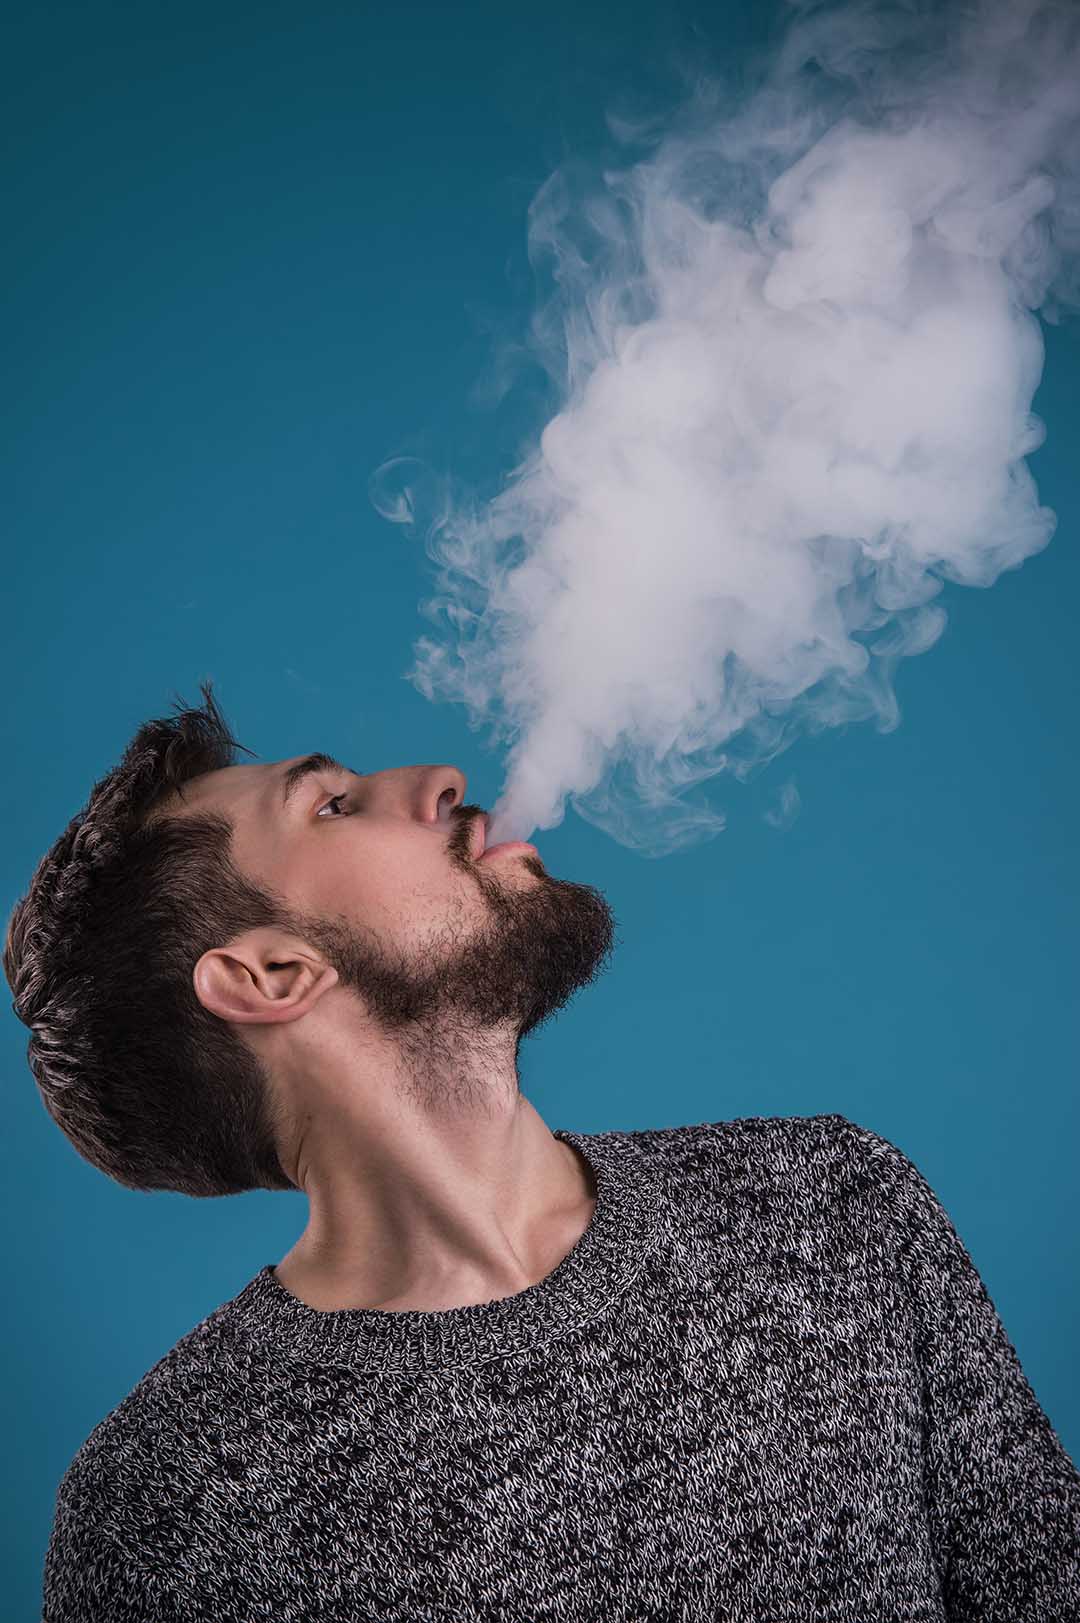 Is it important to buy vape accessories?